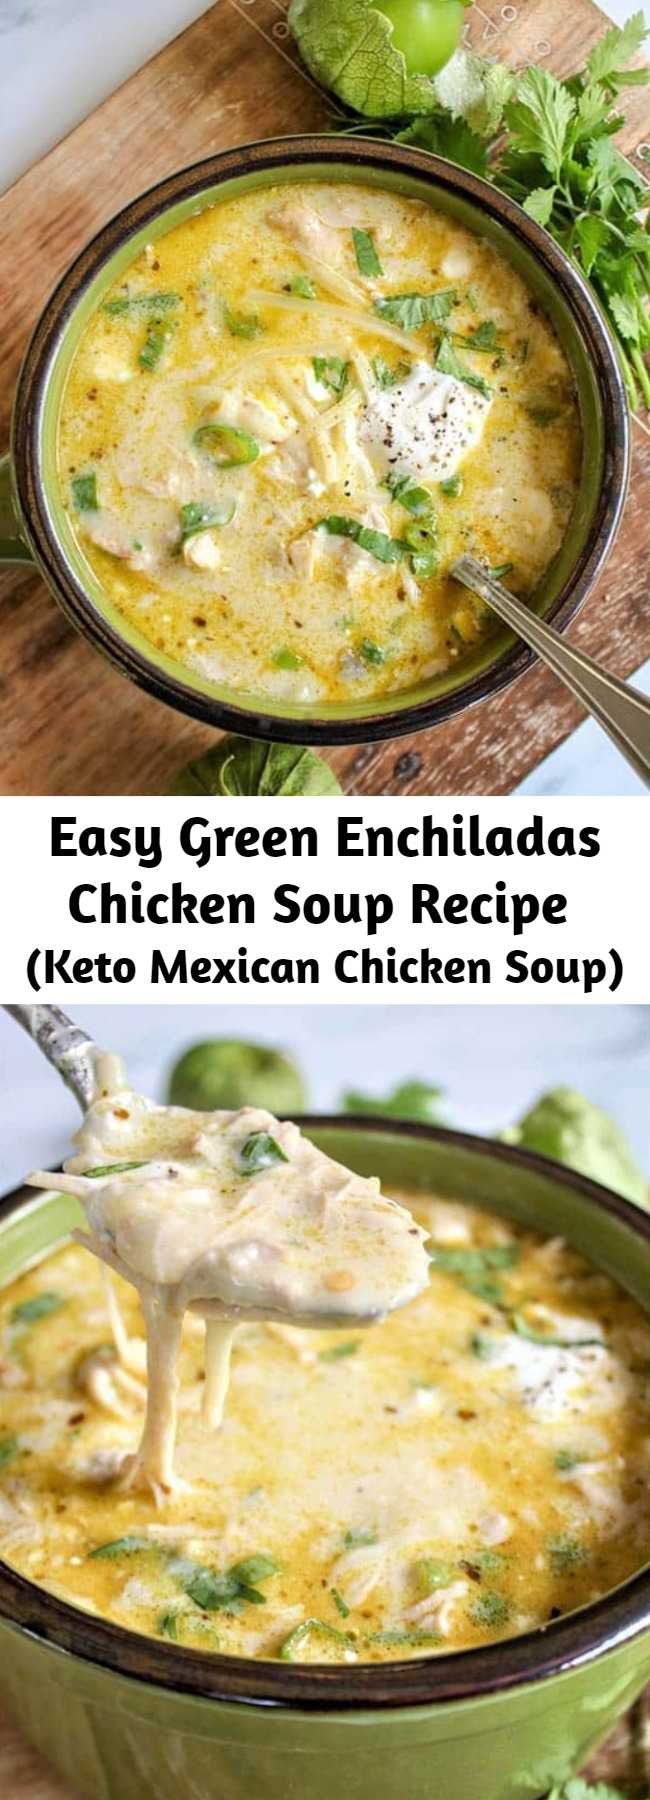 Easy Green Enchiladas Chicken Soup Recipe (Keto Mexican Chicken Soup) - Green Enchiladas Chicken Soup, with a creamy broth of green enchiladas sauce, salsa verde, cheeses, and tender shredded chicken, you can't go wrong with this recipe. Perfect for those busy nights! This Mexican soup recipe is keto and low carb friendly which will make everyone happy! This recipe can be made on a stovetop or in an Instant Pot. #keto #mexican #soup #slowcooker #crockpot #lowcarb #sugarfree #instantpot